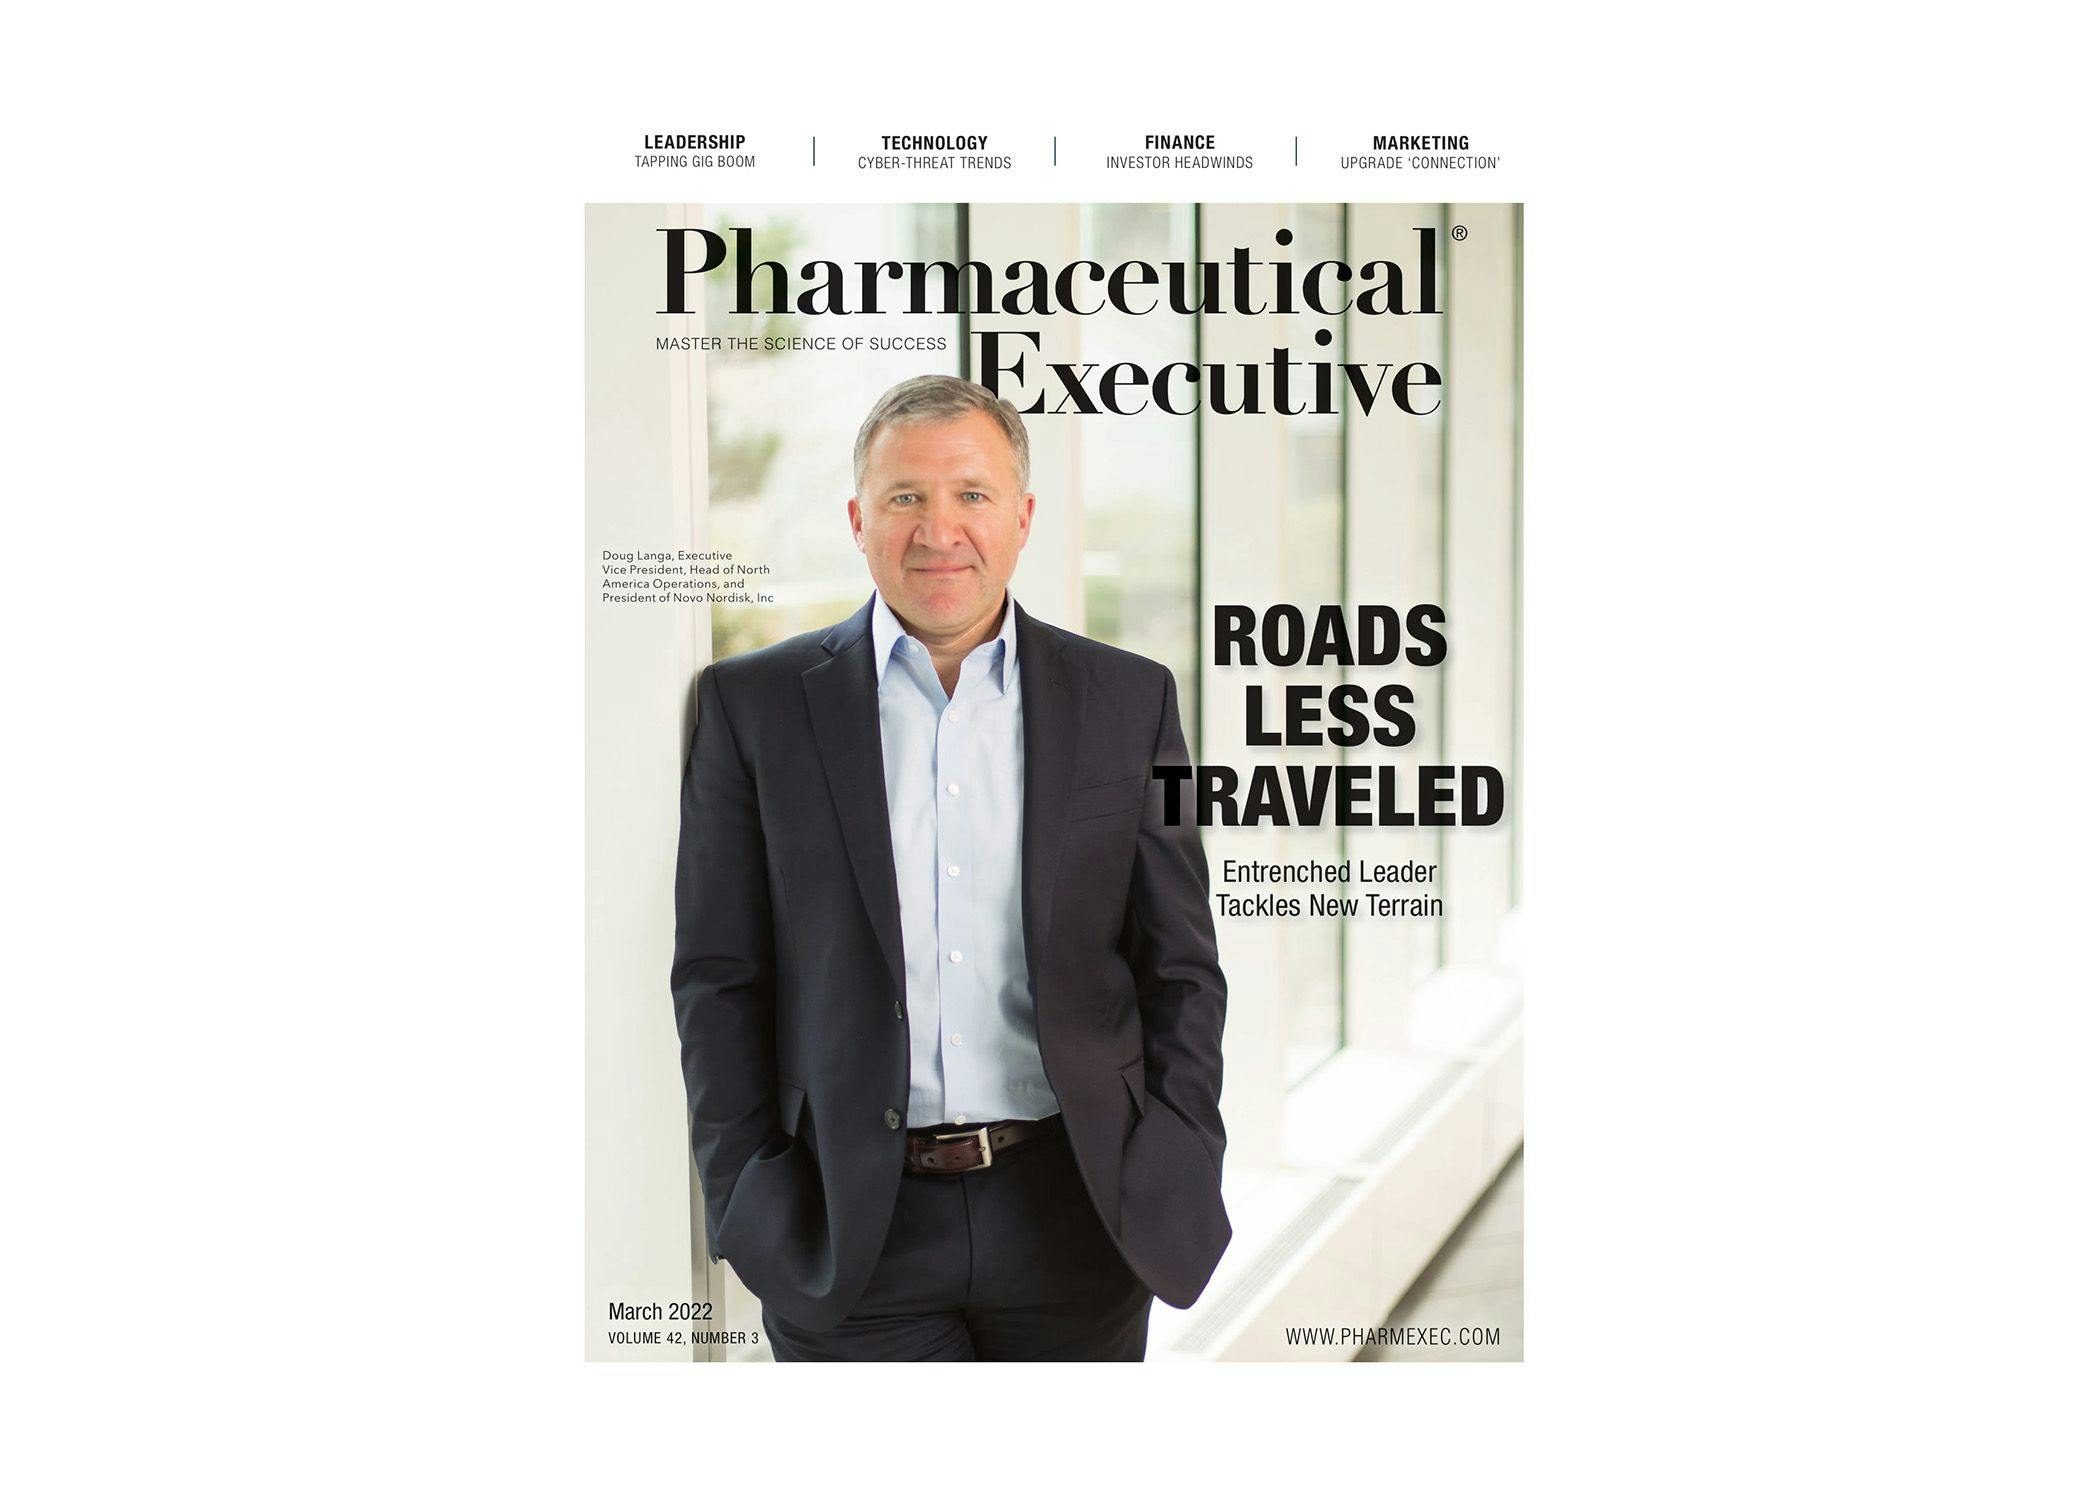 Pharmaceutical Executive, March 2022 Issue (PDF)